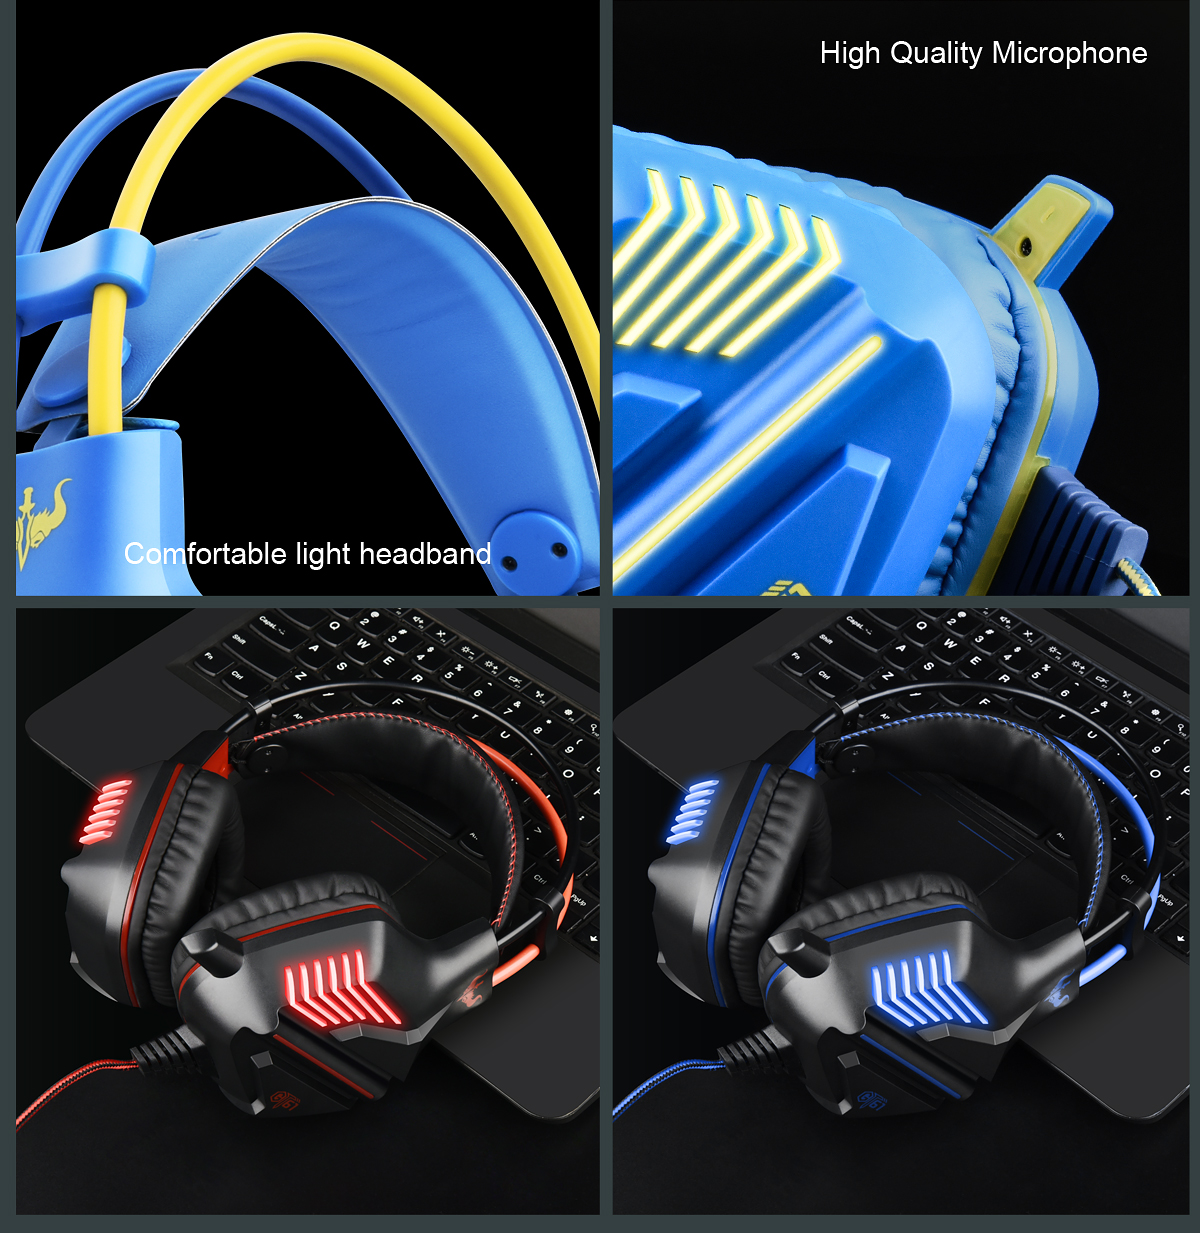 OVLENG-GT61-Wired-Gaming-Headset-USB-71-Channel-50mm-Bass-Stereo-Sound-LED-Light-E-sport-Headphone-w-1817529-17